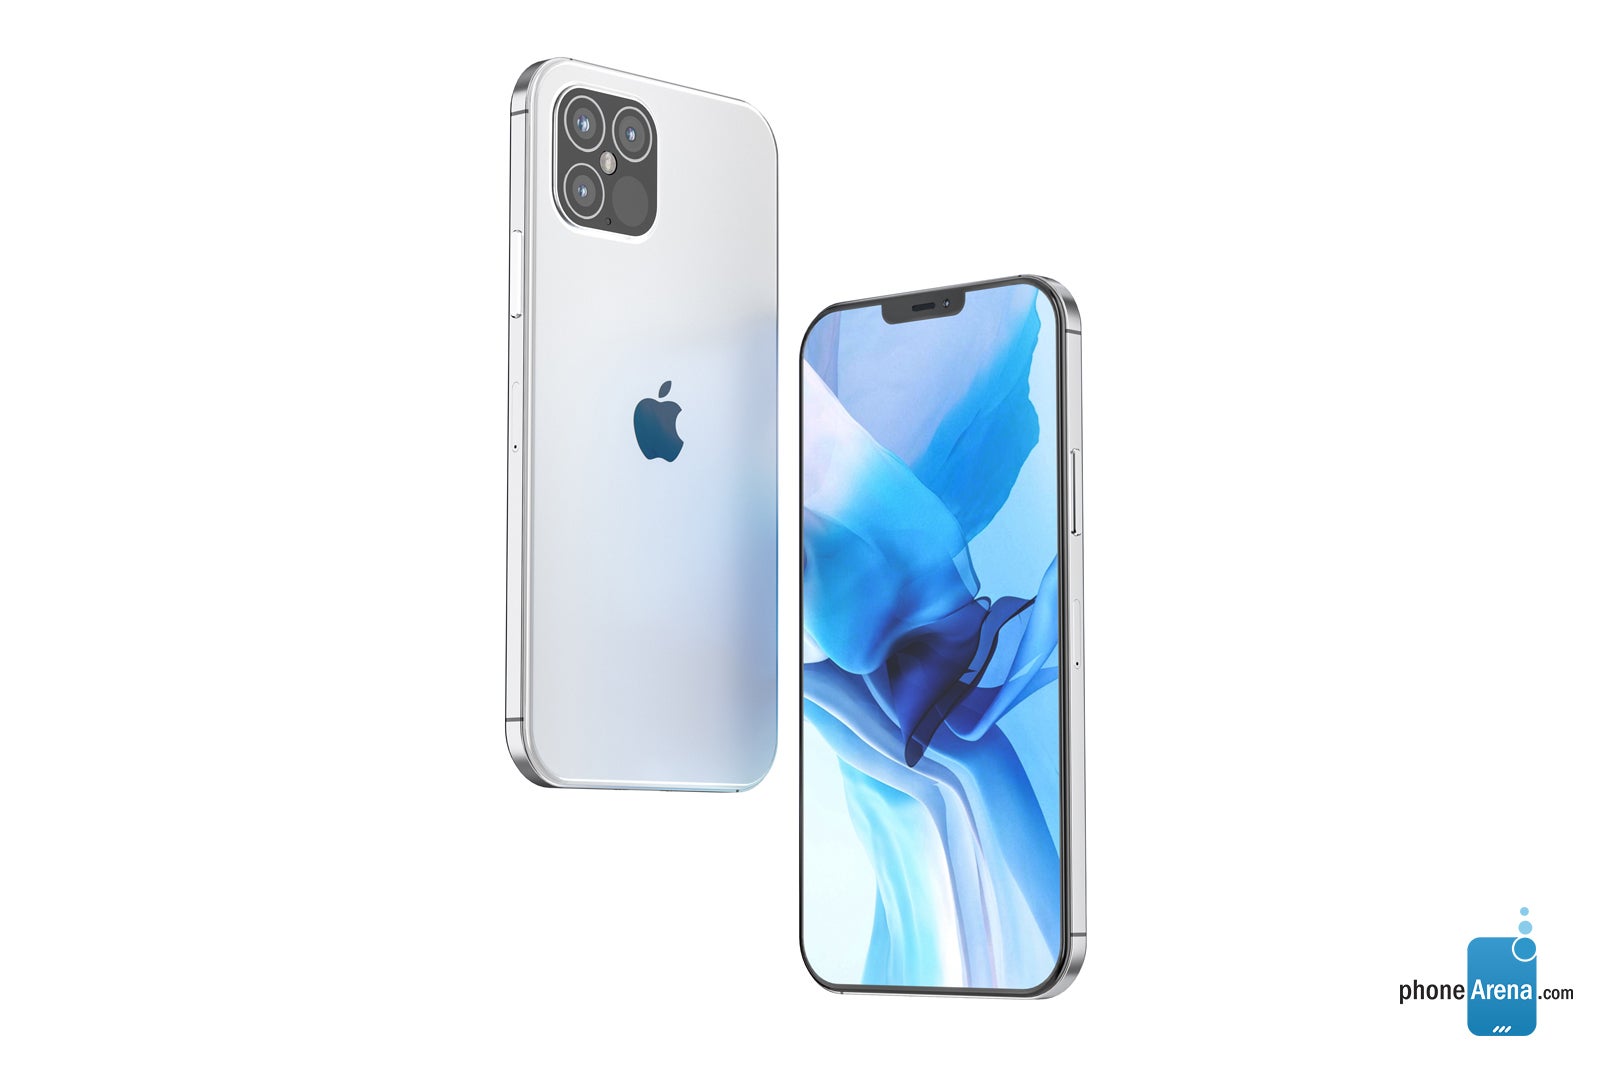  Apple iPhone 12 Pro concept render - Possible iPhone 12/Pro 5G & Apple Watch Series 6 announcement and release dates leak